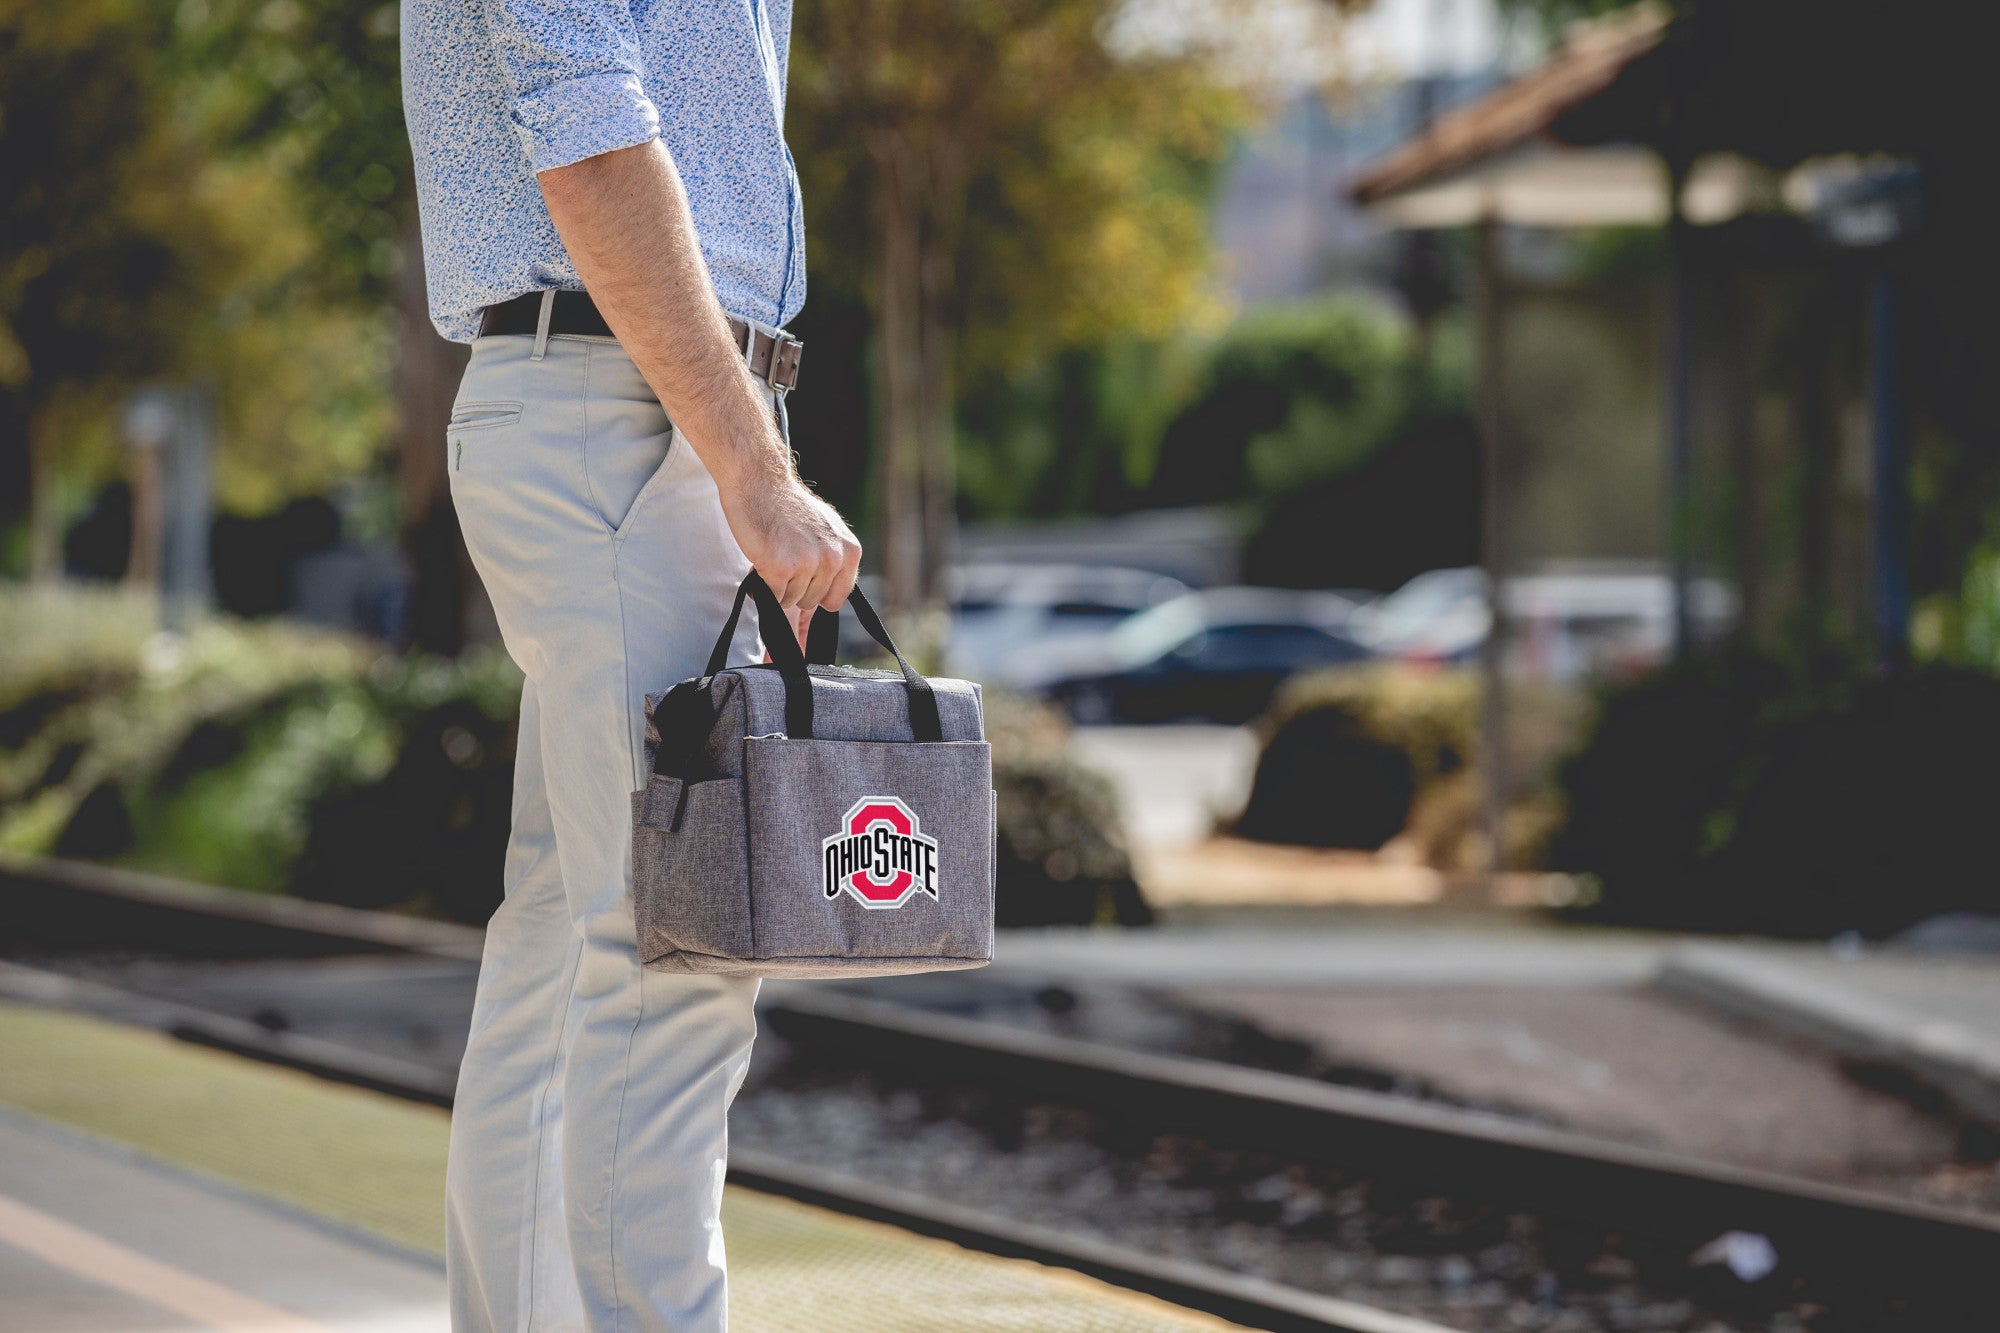 Ohio State Buckeyes - On The Go Lunch Bag Cooler